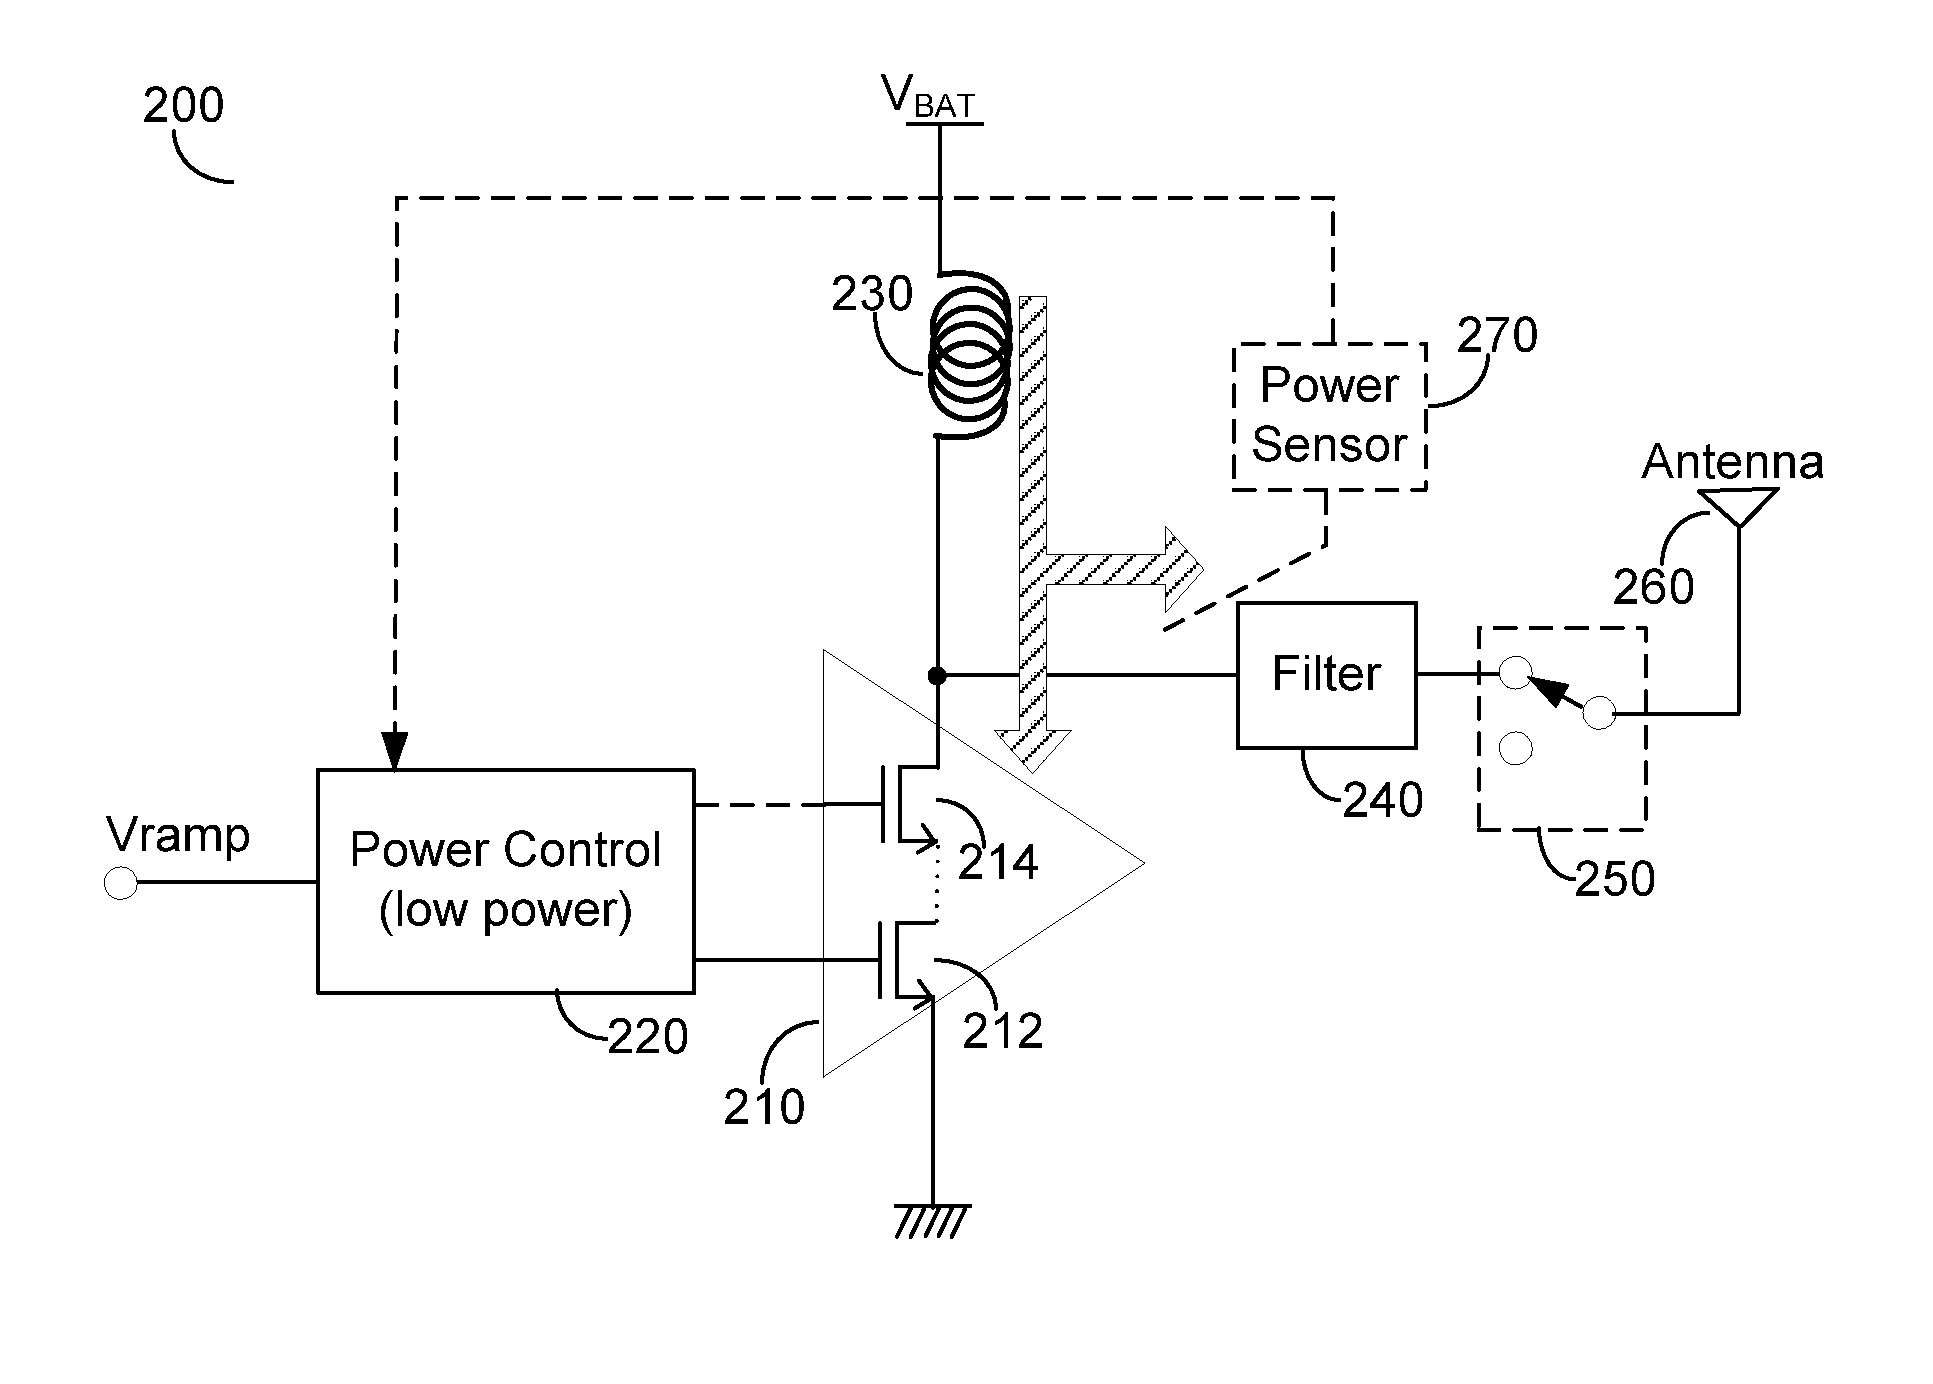 Gate-based output power level control power amplifier